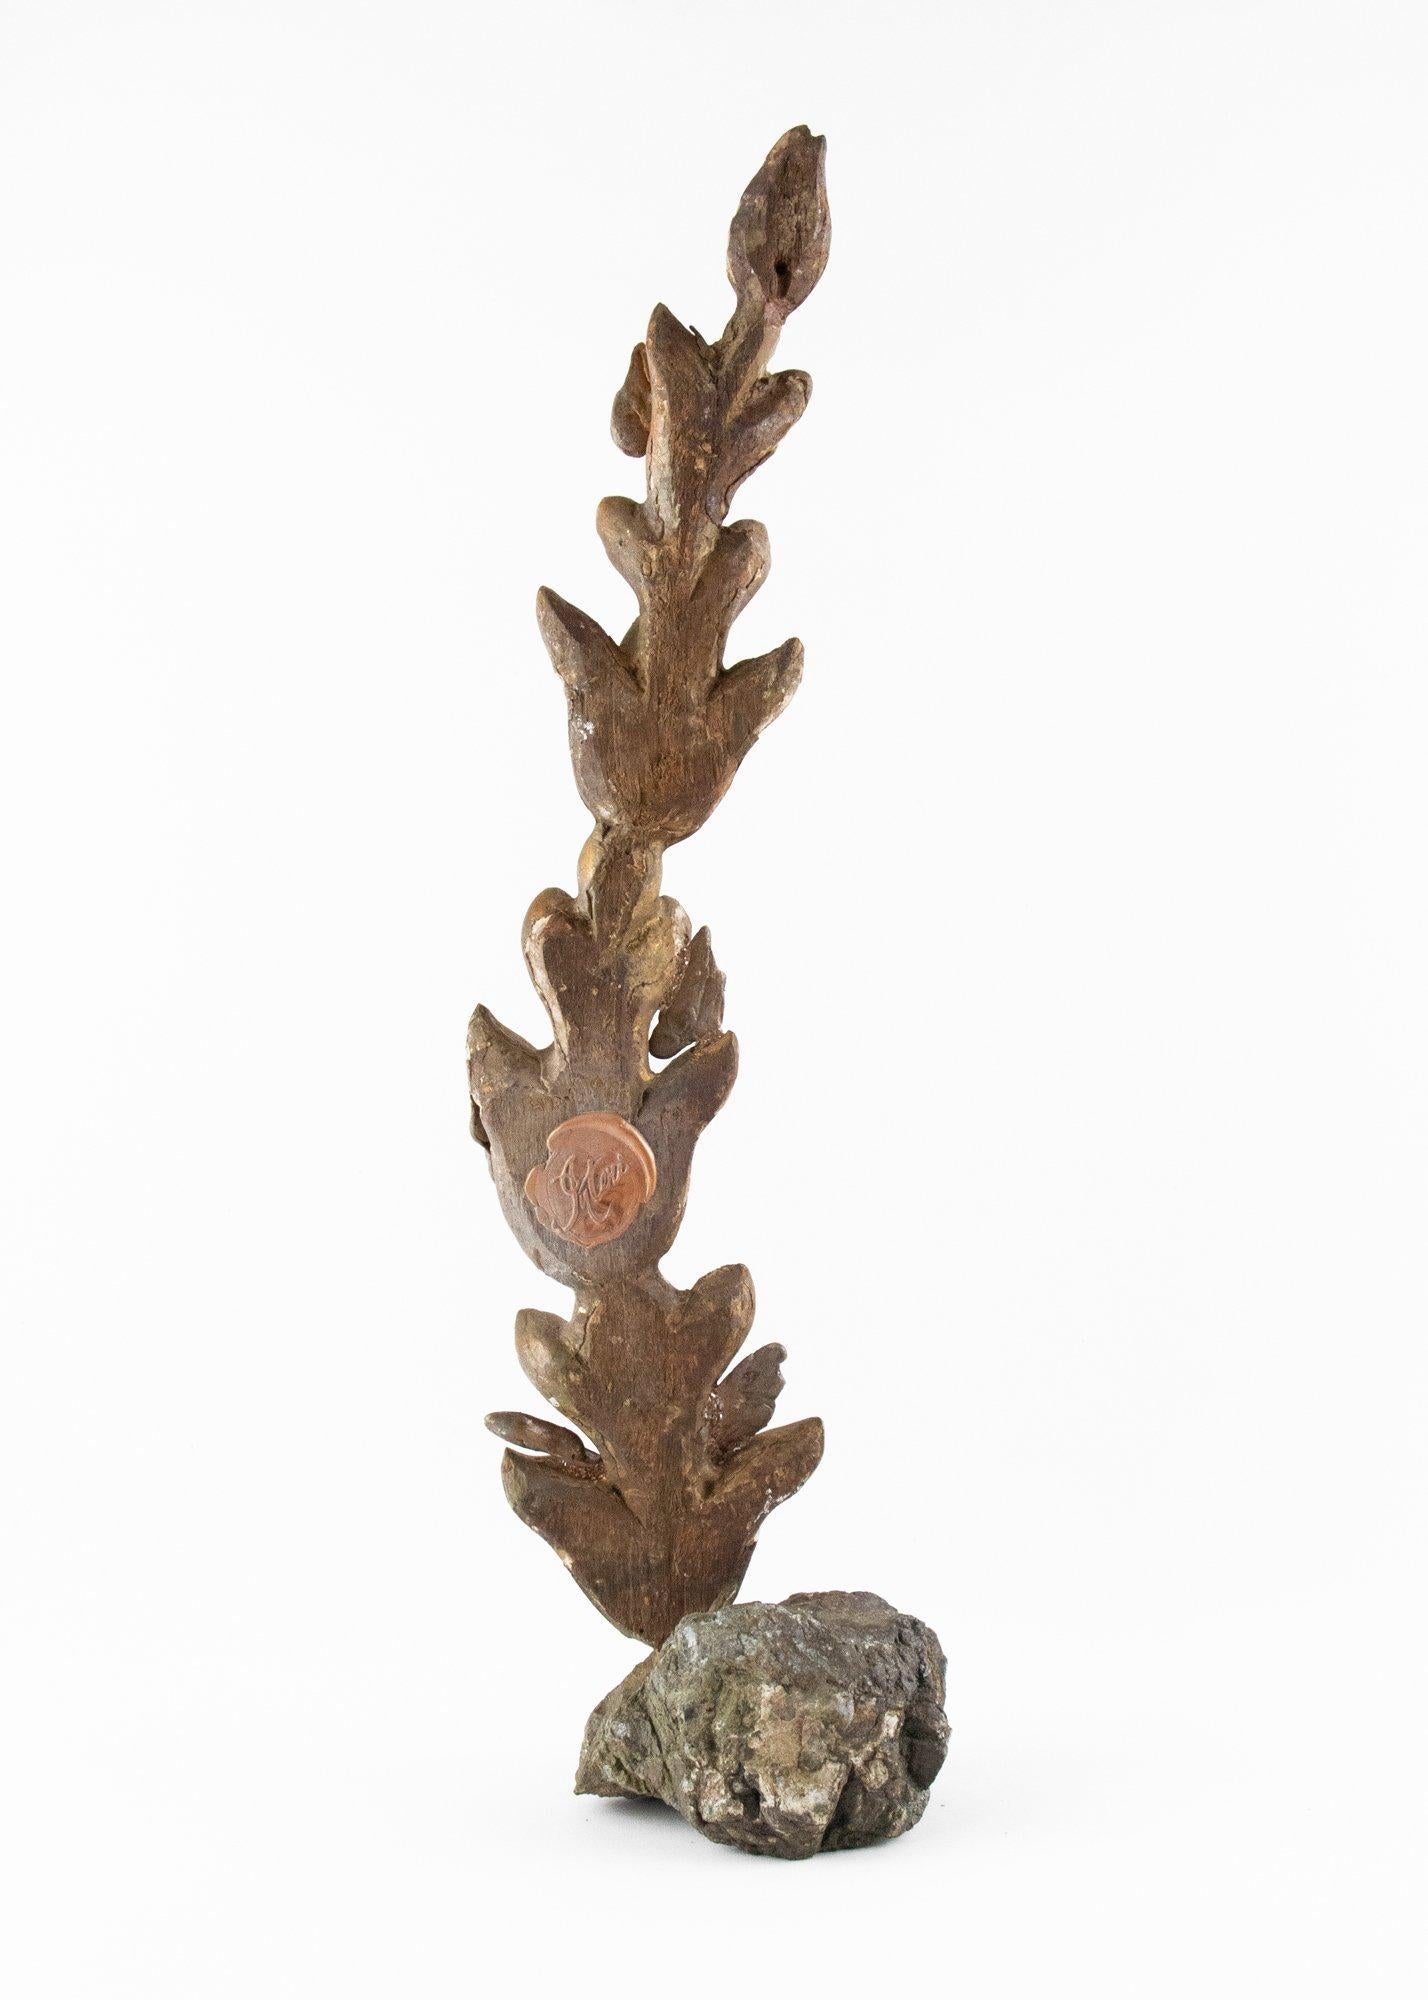 Carved 18th Century Italian Leaf Fragment Decorated with Baroque Pearls on Chalcopyrite